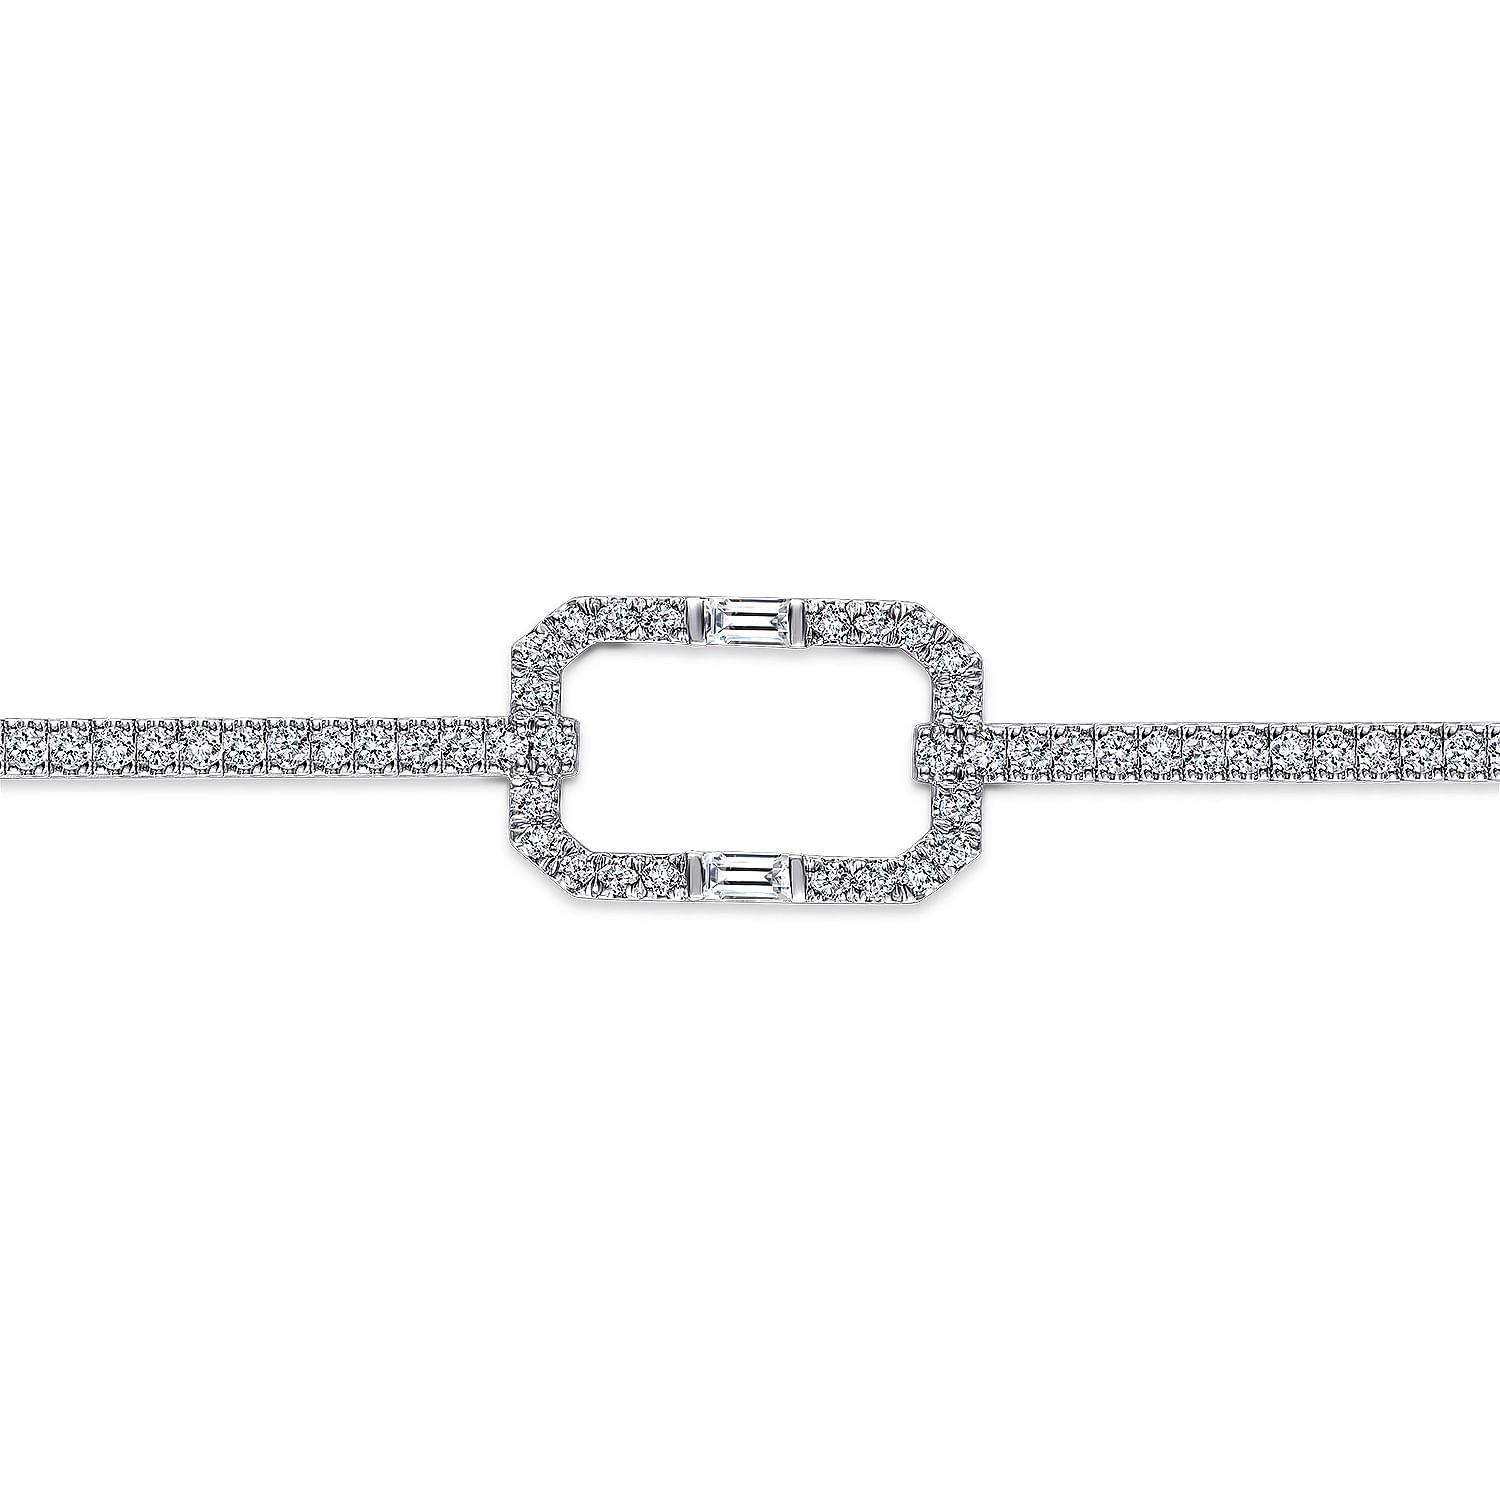 14K White Gold Round and Baguette Diamond Bracelet with Rectangular Stations